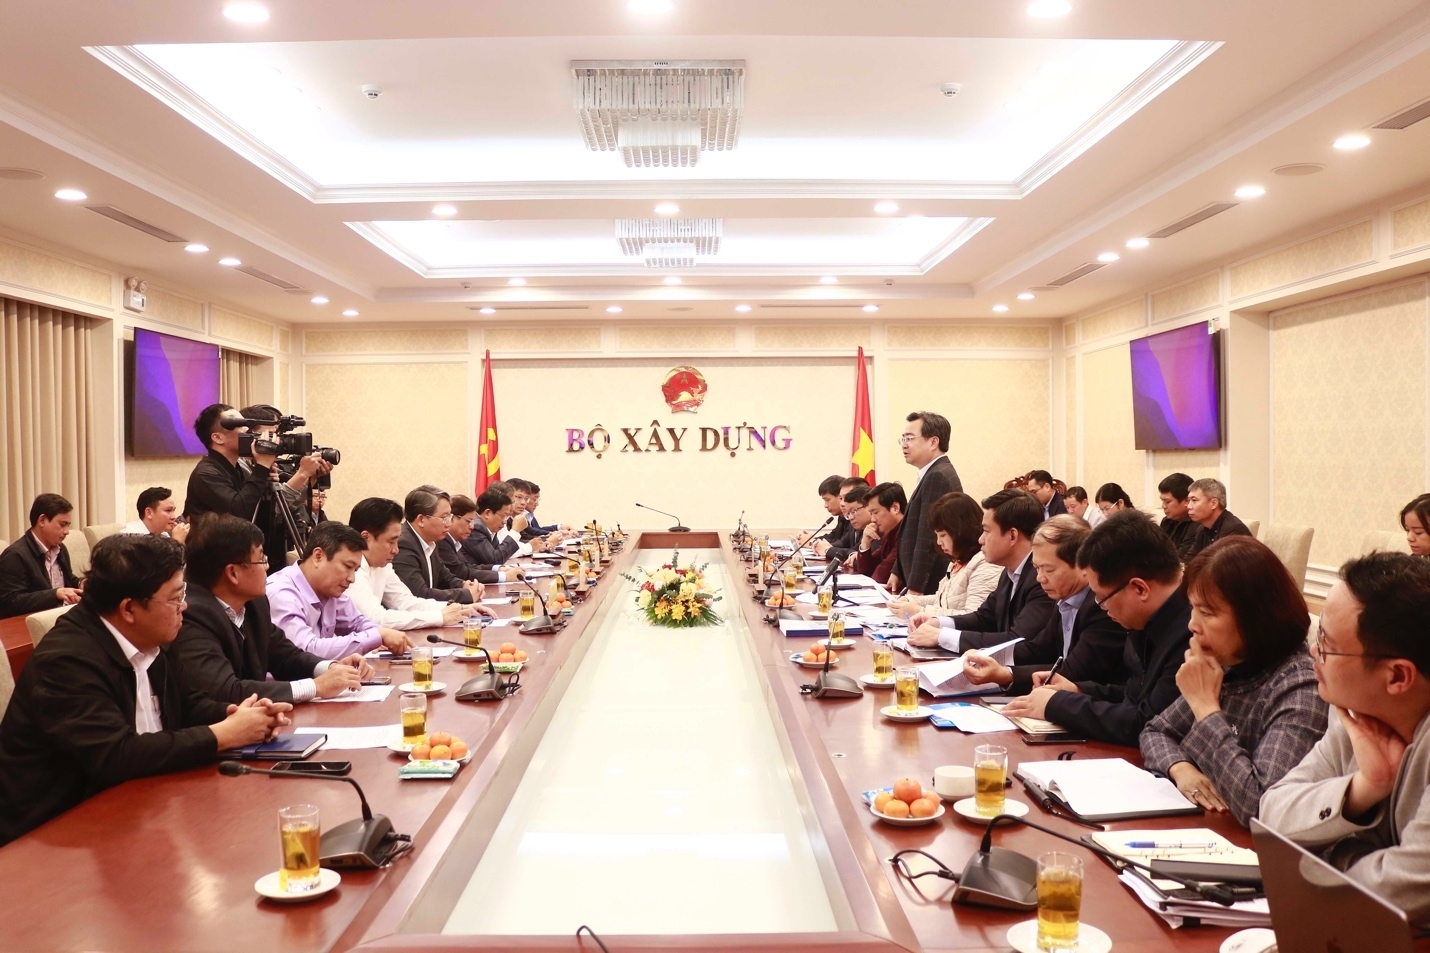 Ministry of Construction - Khanh Hoa province: coordination in the progress of planning projects